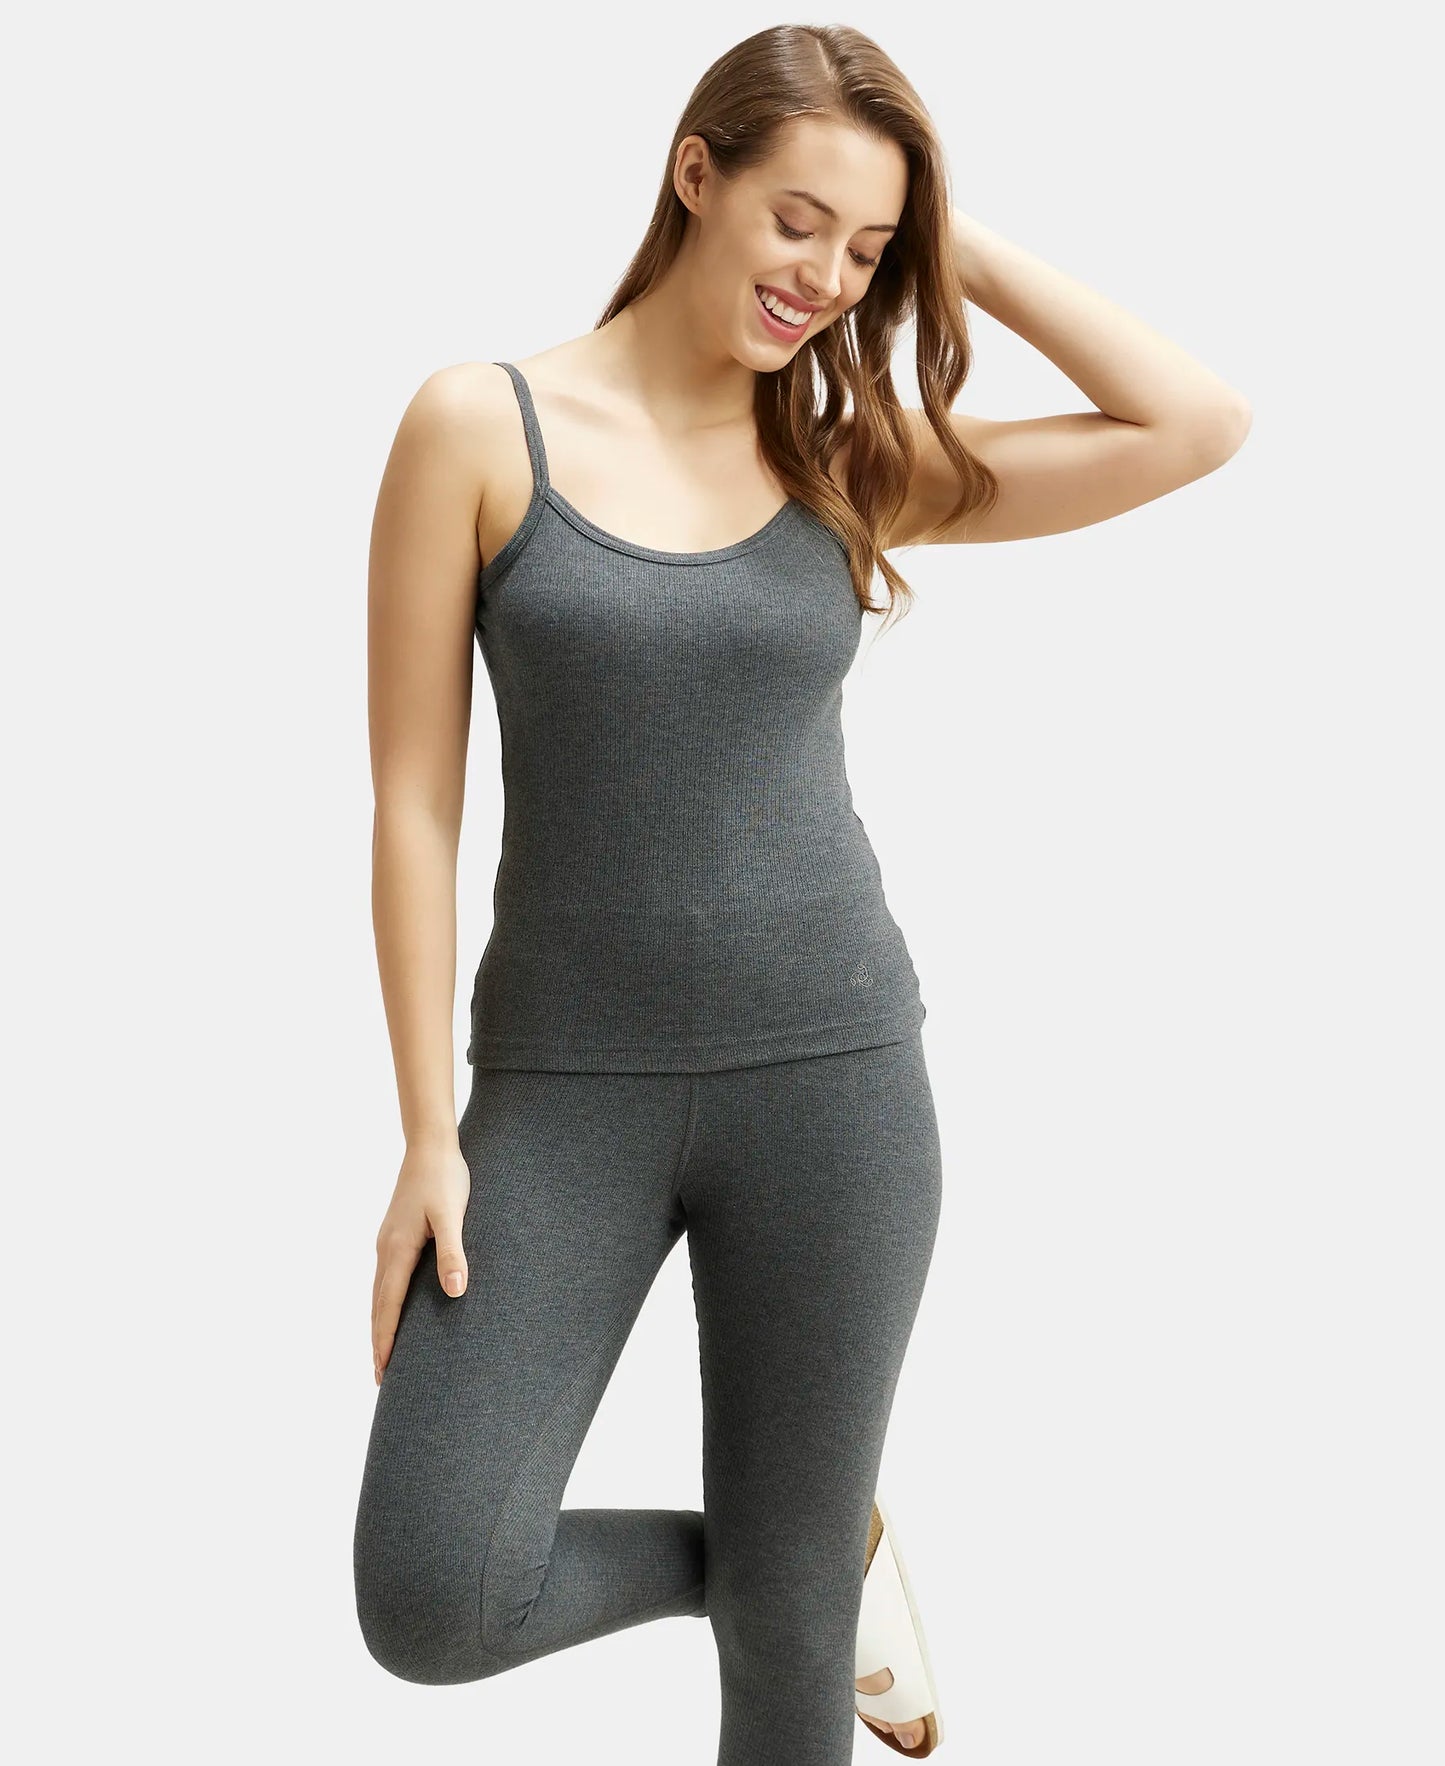 Super Combed Cotton Rich Thermal Camisole with StayWarm Technology - Charcoal Melange-6